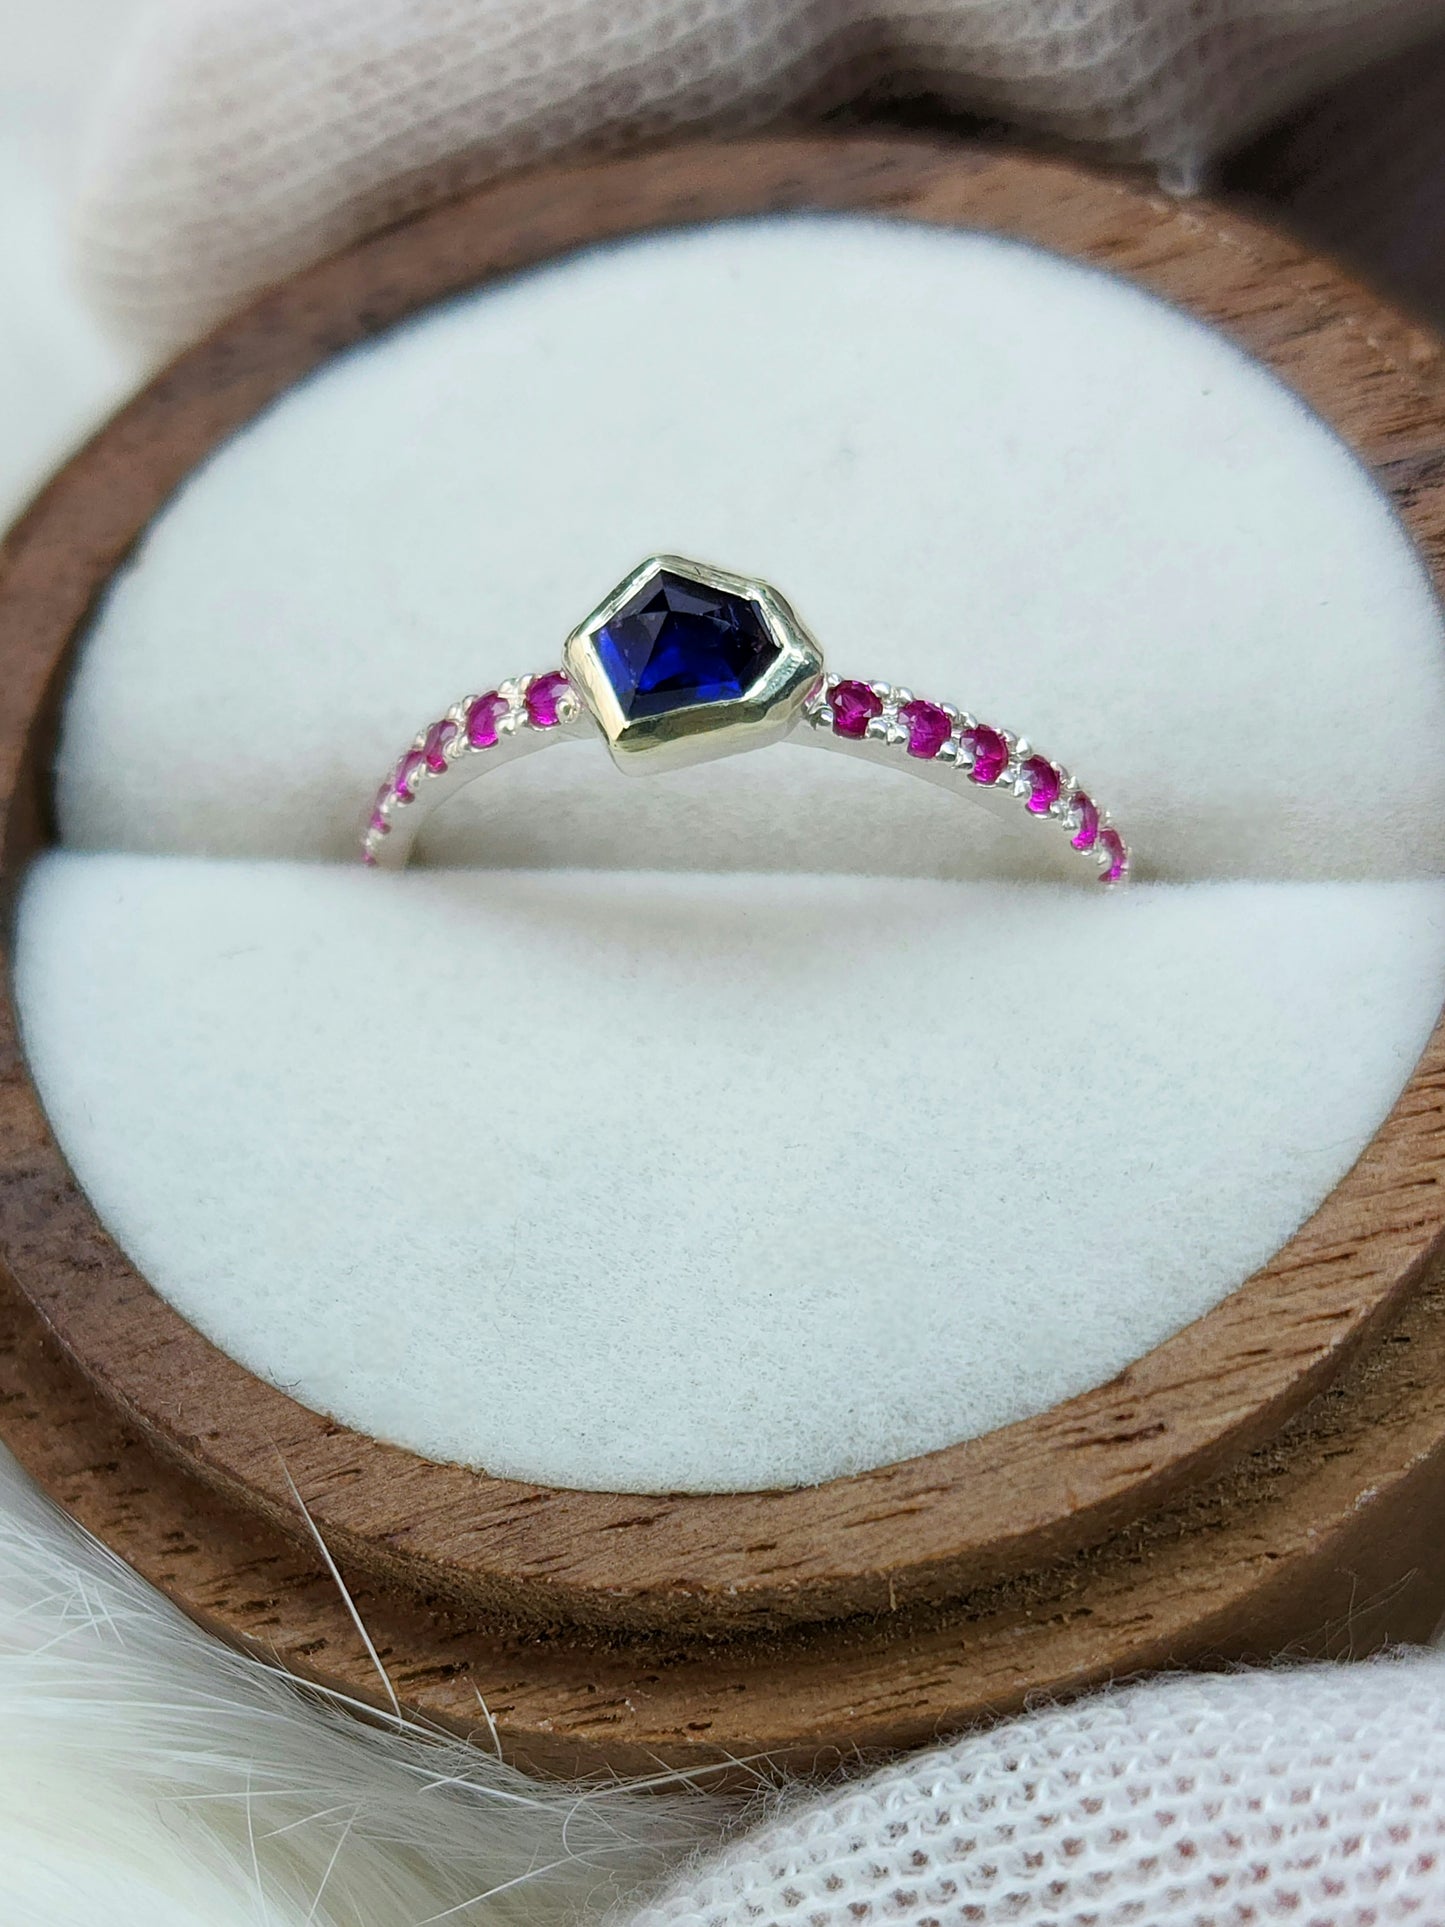 Dark blue horizontal natural winza sapphire,  sterling silver ring, set in 10 karat yellow gold bezel with 12 synthetic 1.5mm rubies